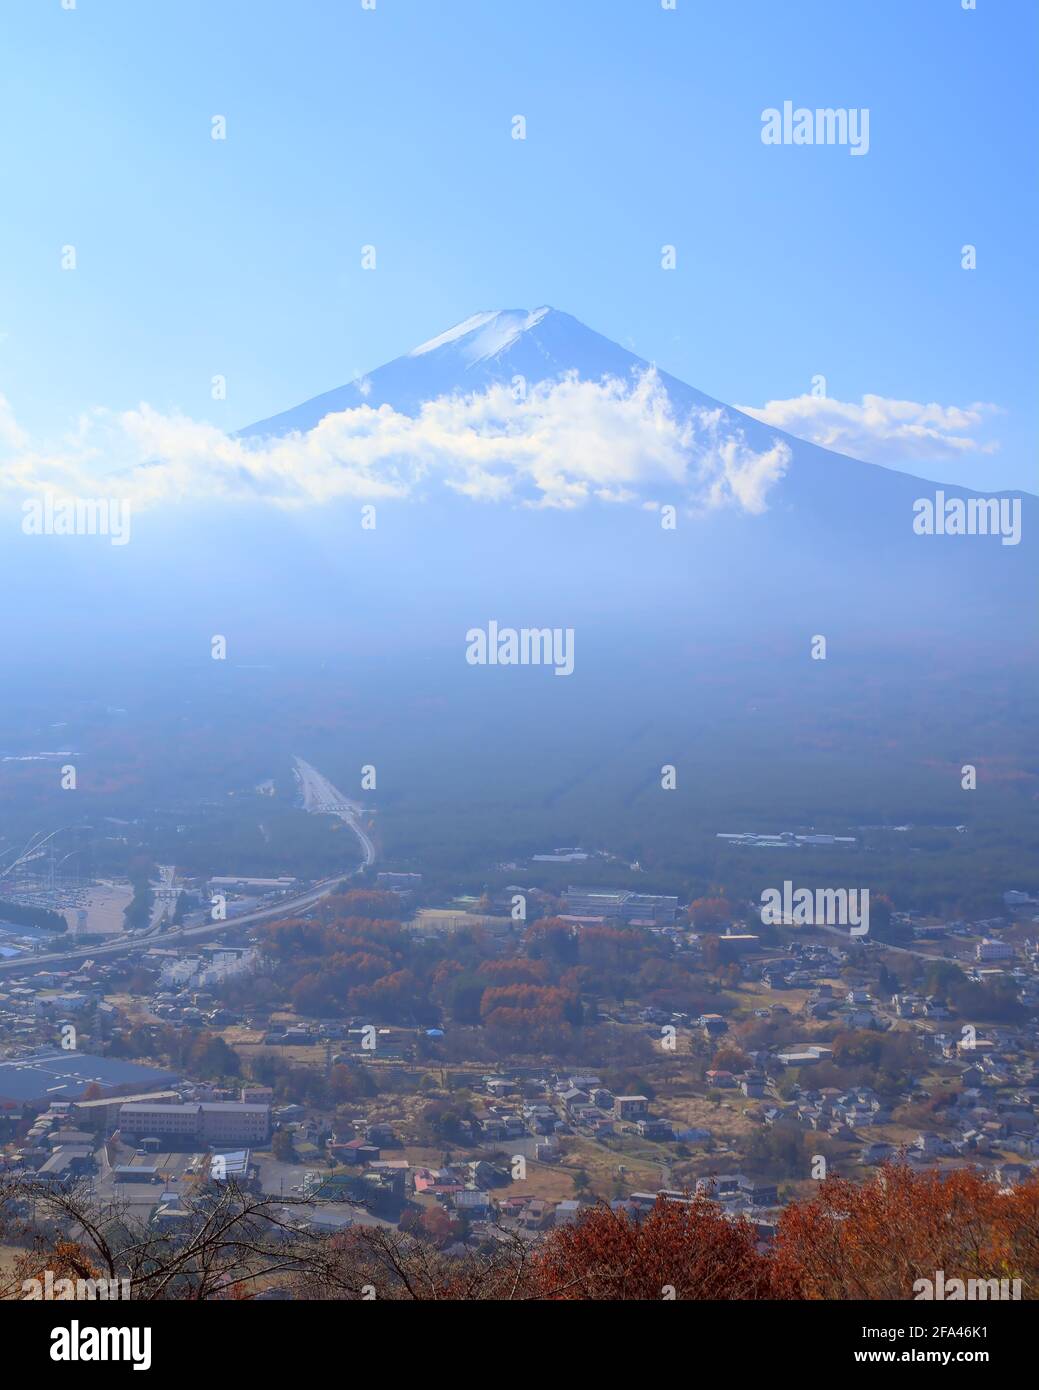 Daytime view of Mount Fuji from afar, partially covered by low clouds under a bright blue sky and with part of the city of Fujiyoshida visible Stock Photo